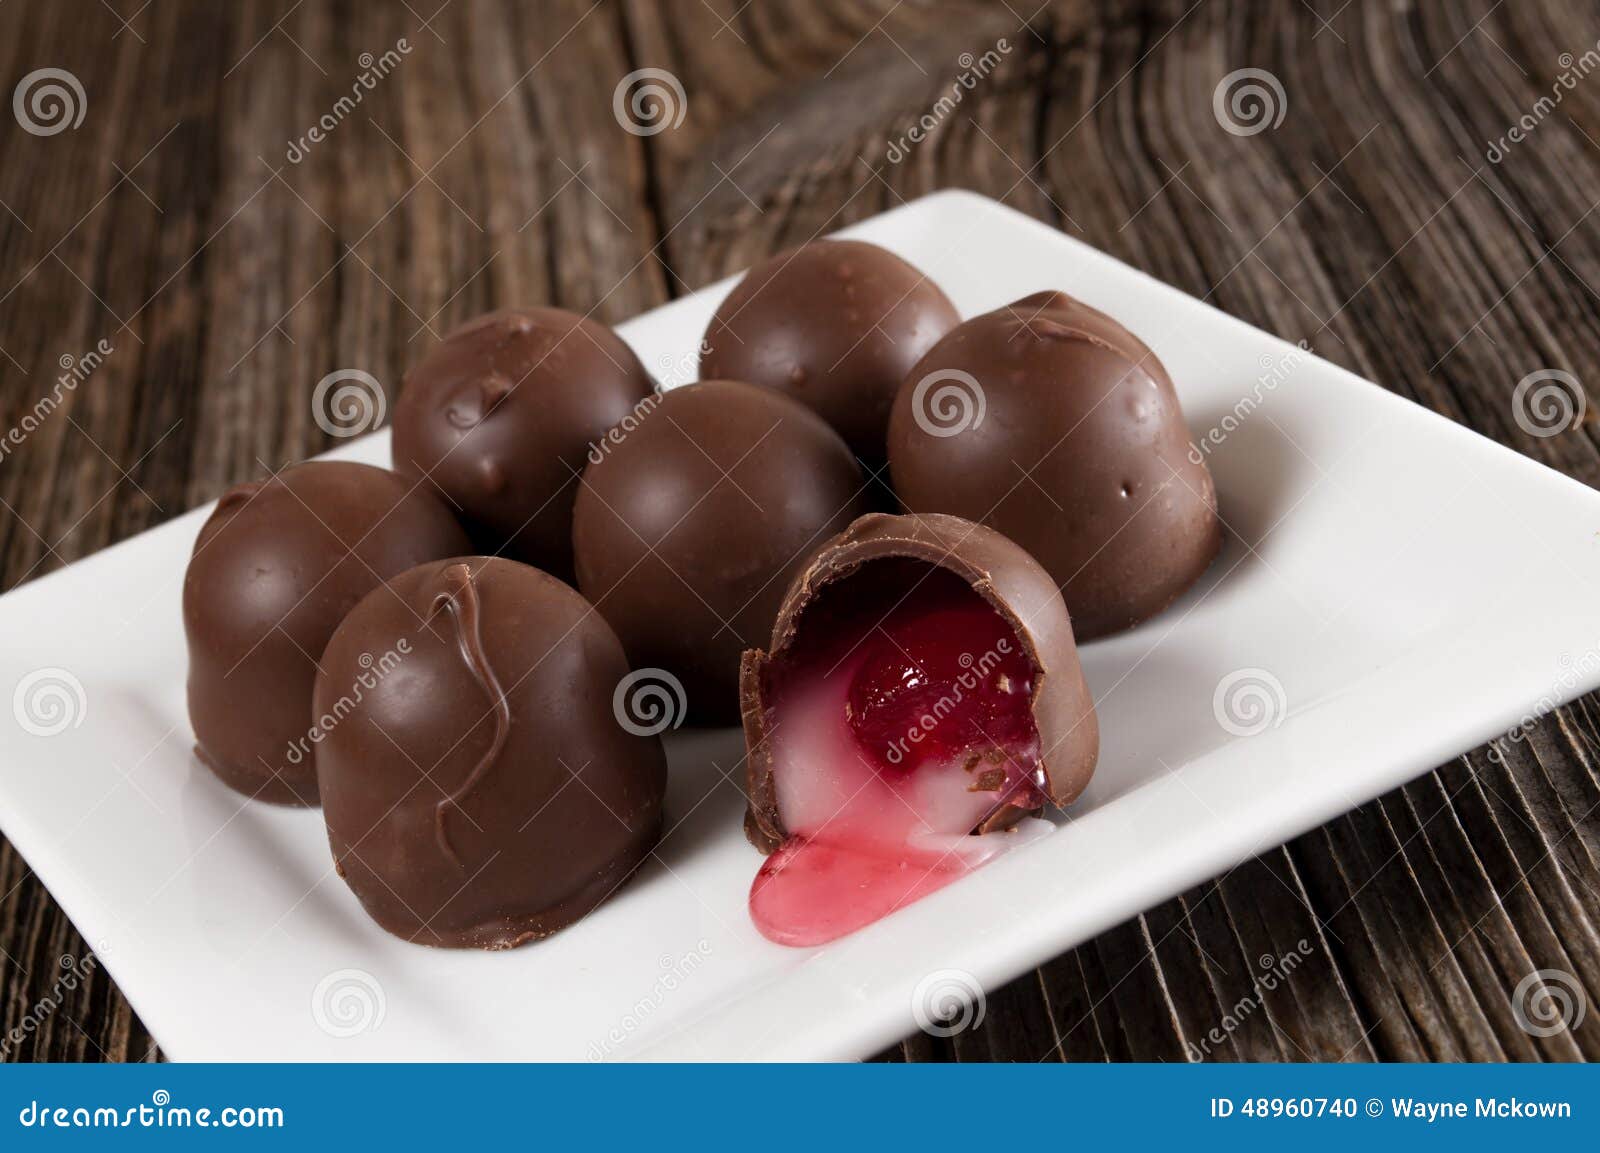 cherry filled chocolate candy,dish